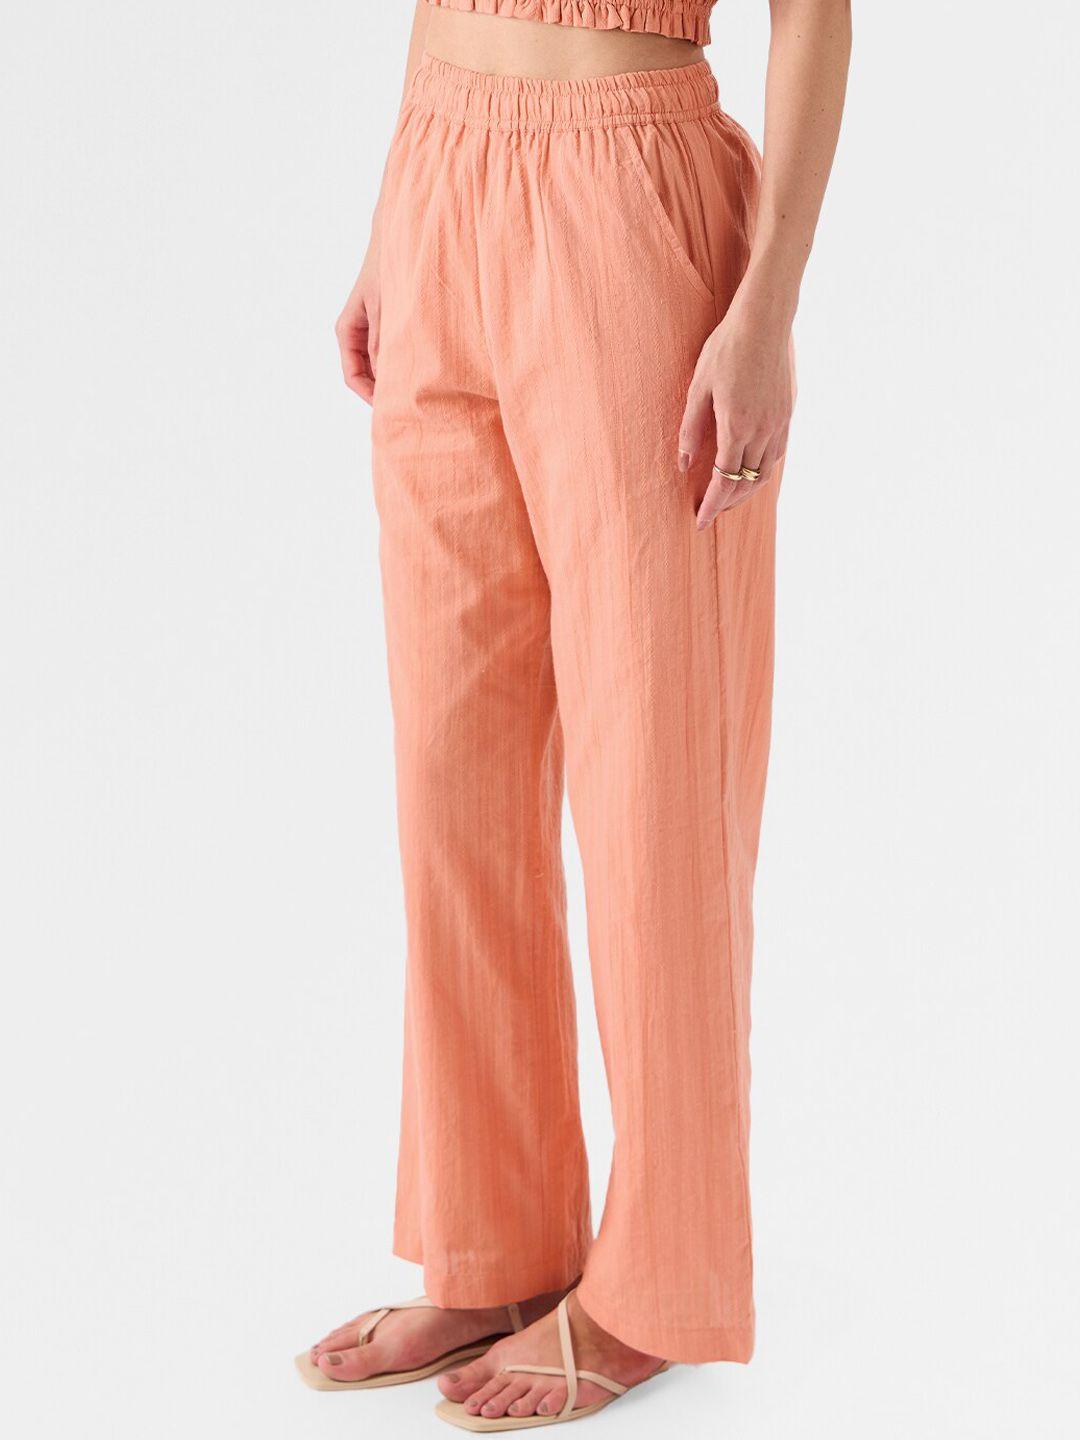 the-souled-store-women-peach-coloured-flared-easy-wash-trousers